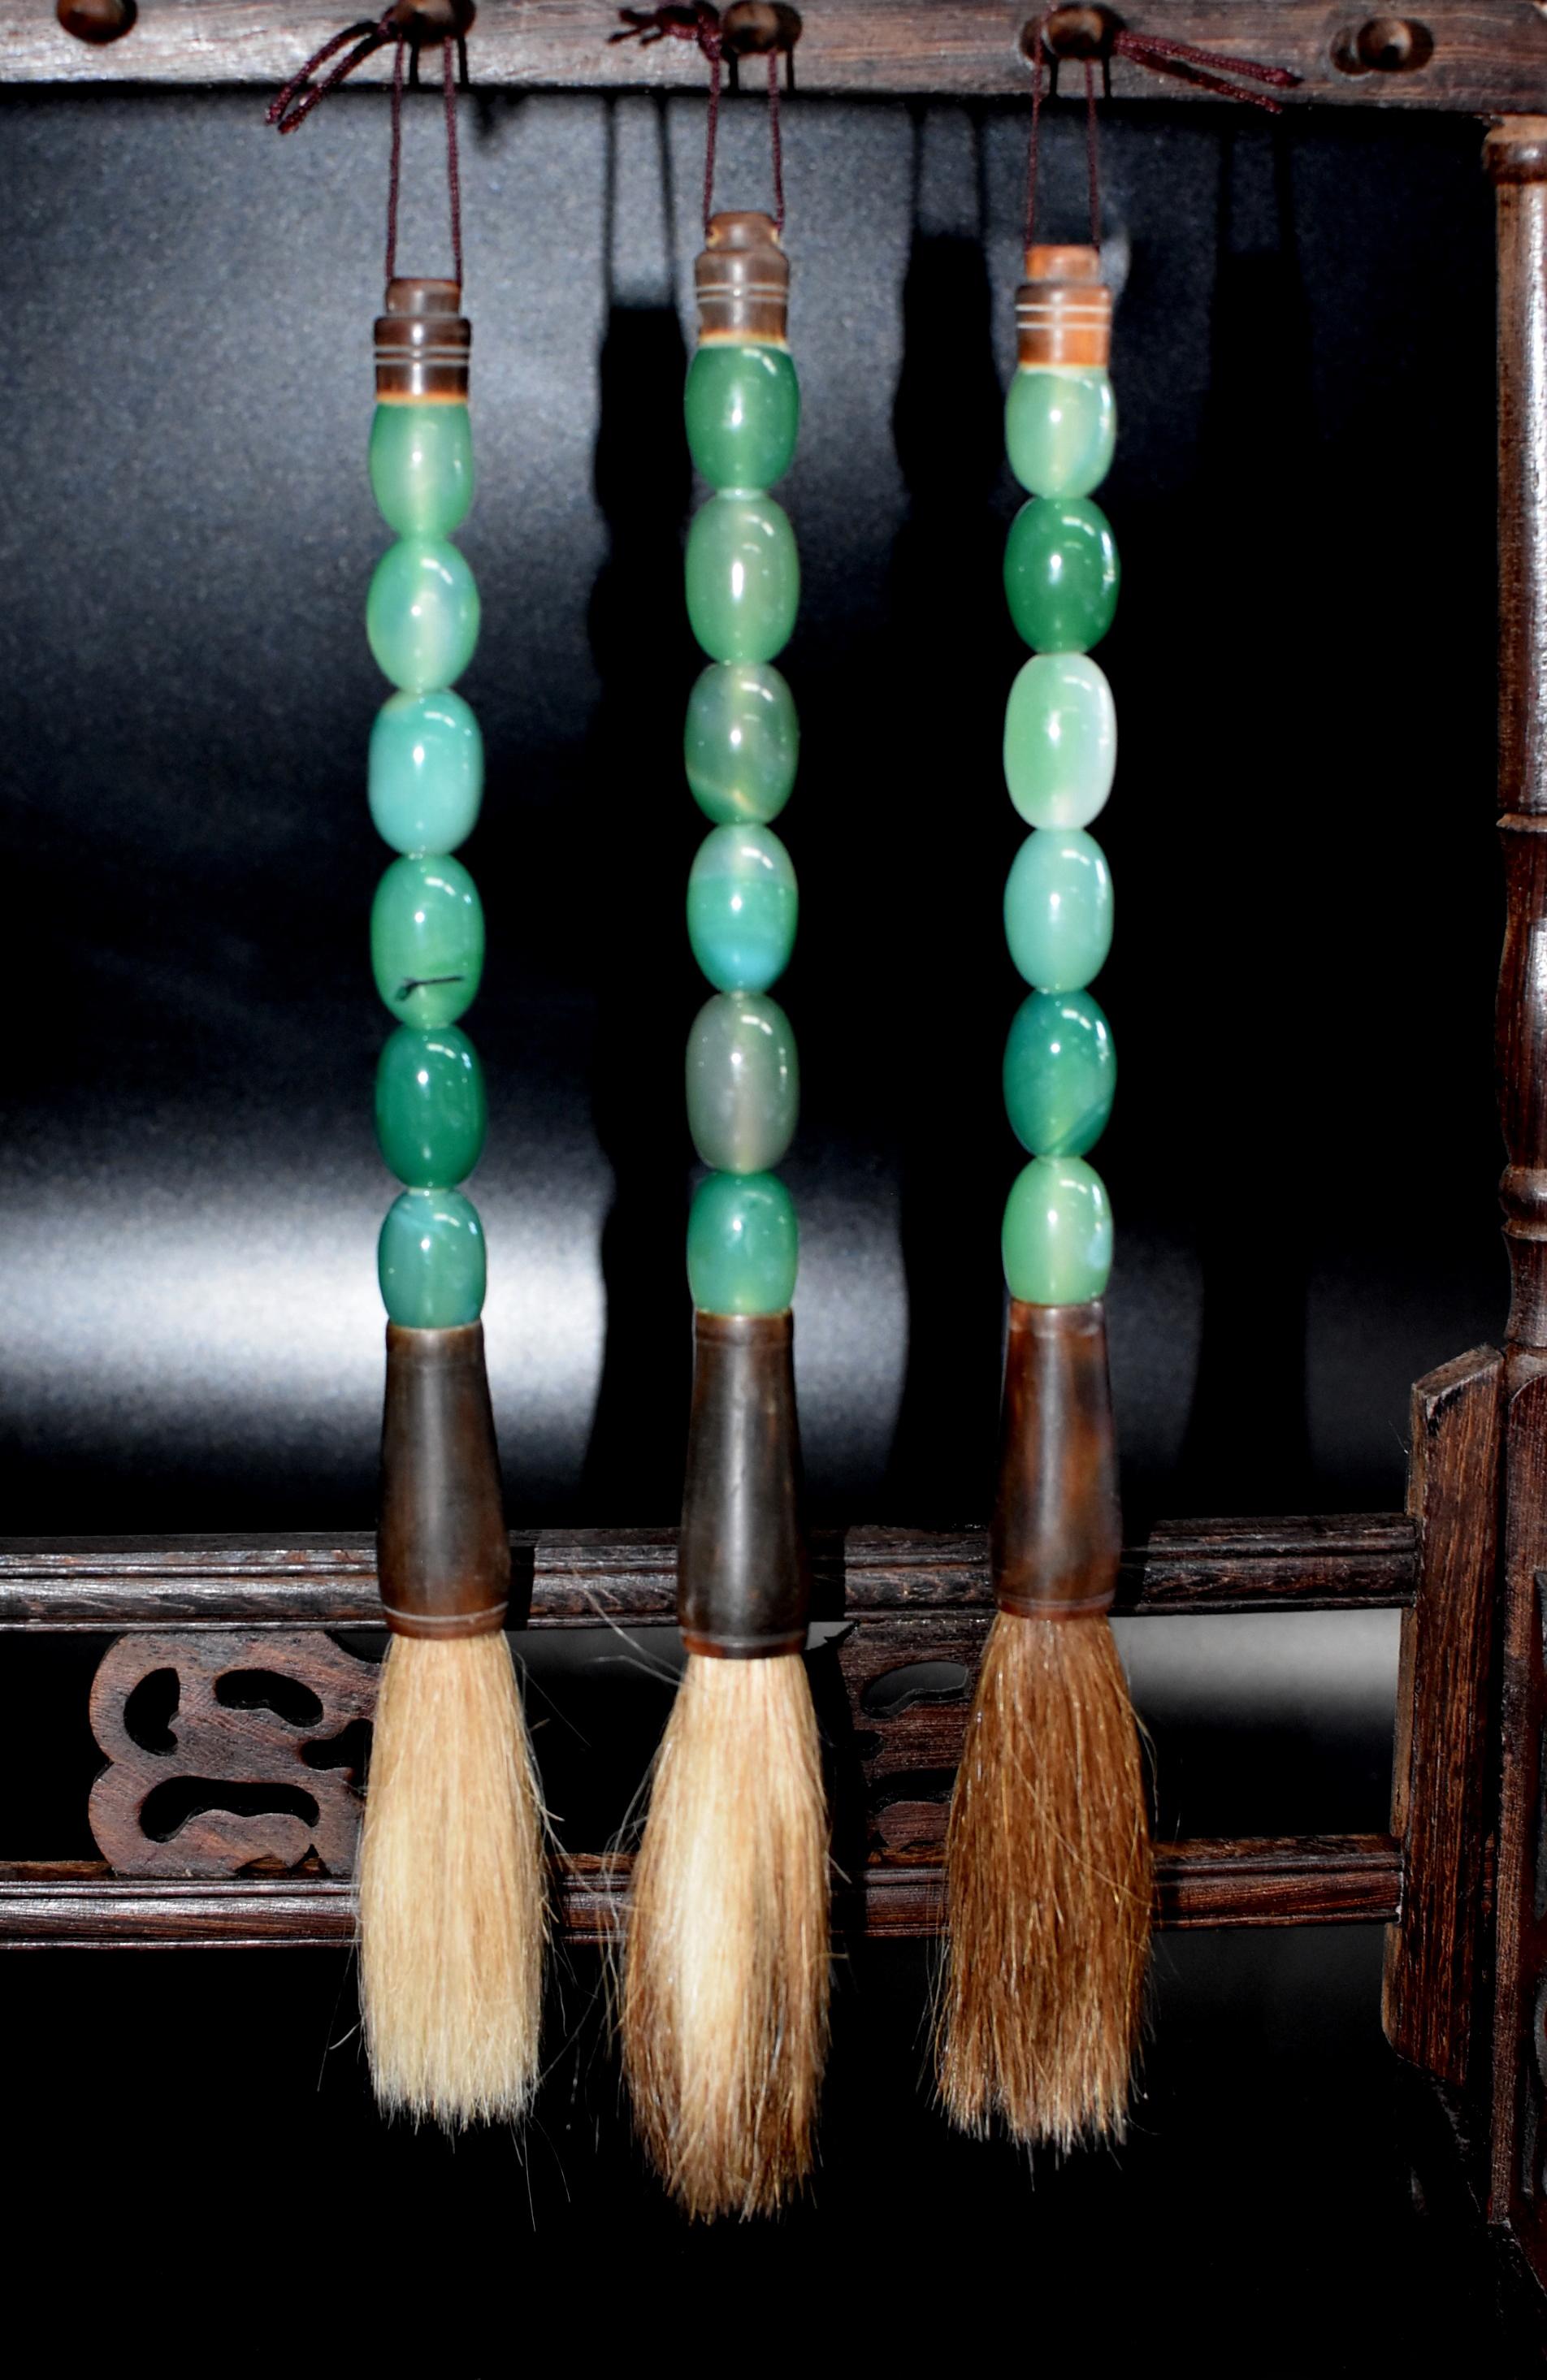 Calligraphy Brush Set of 5 with Glass Beads and Horn Ferrules 2